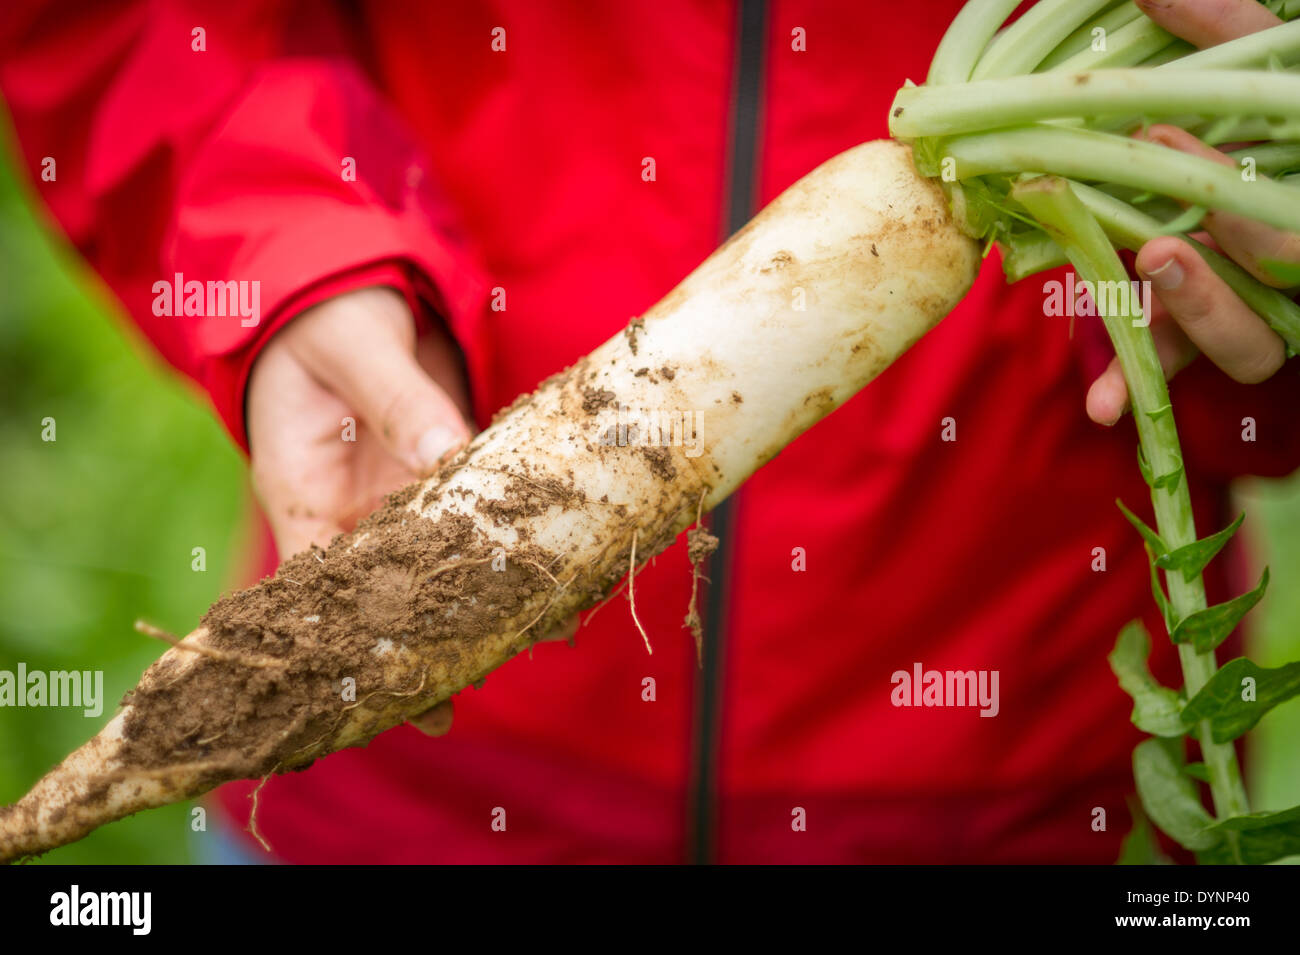 Close-up of hands holding daikon radish covered with dirt Clarksville, Maryland Stock Photo